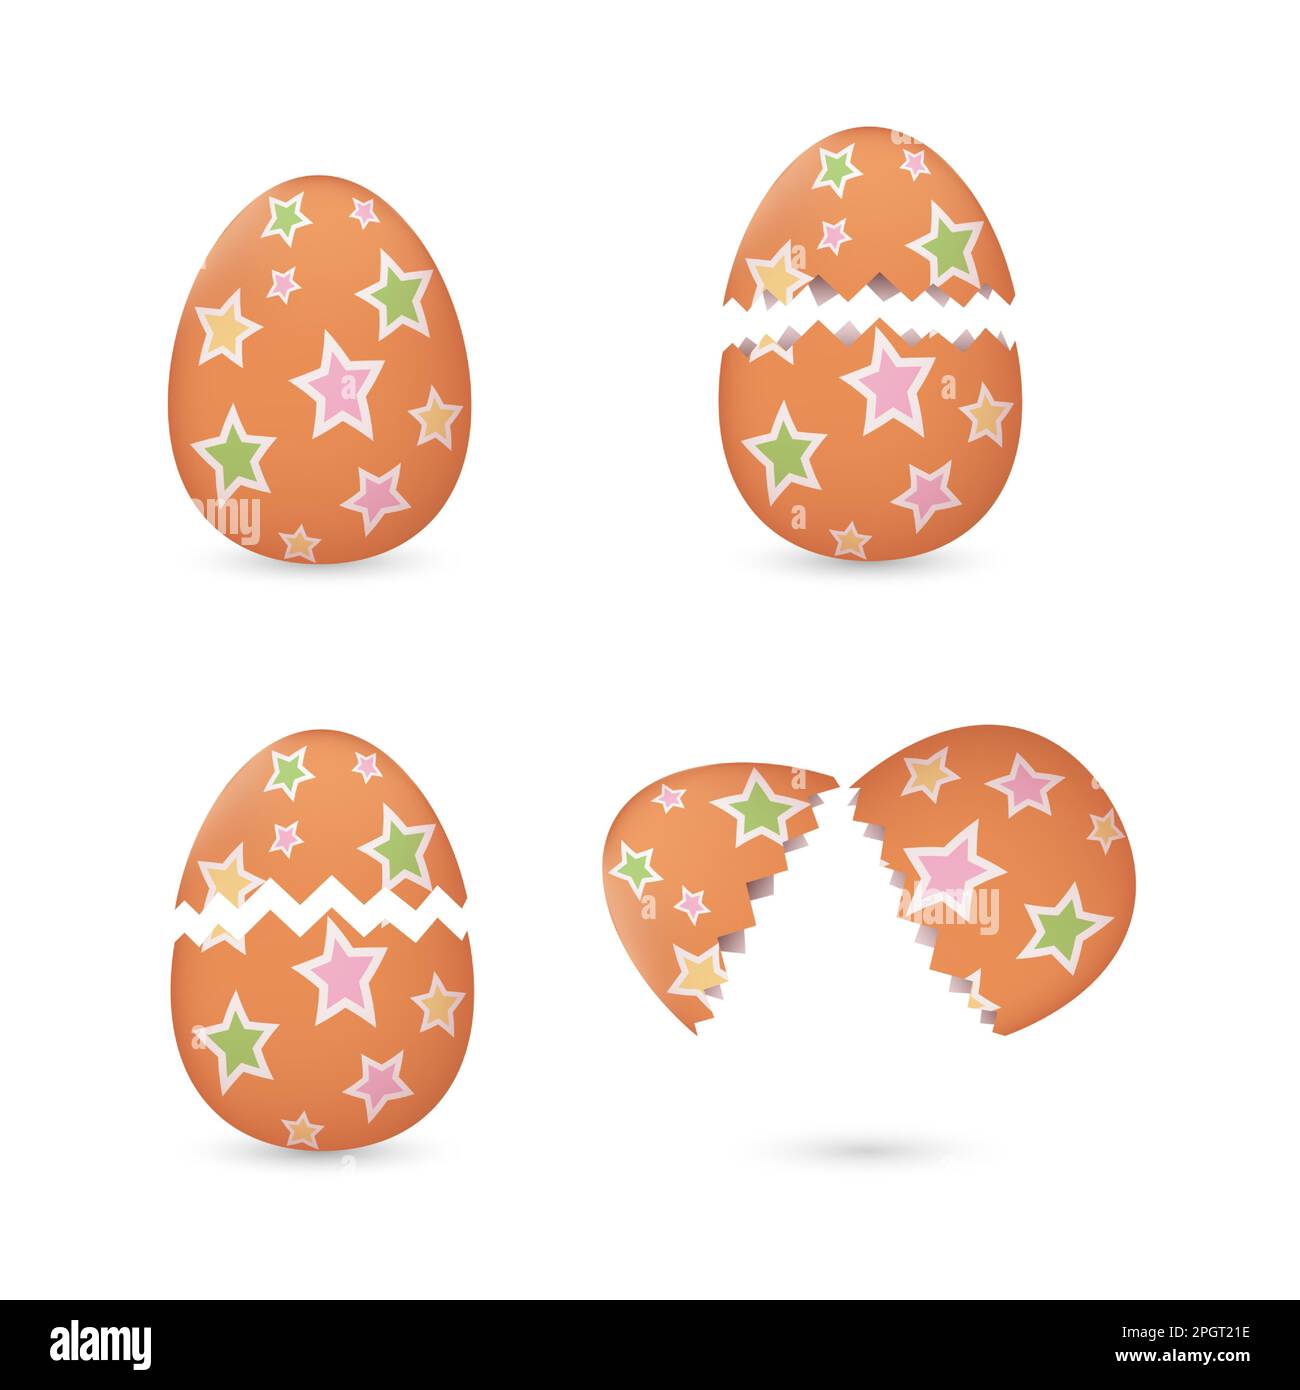 Cracked Stock Vector Images - Alamy